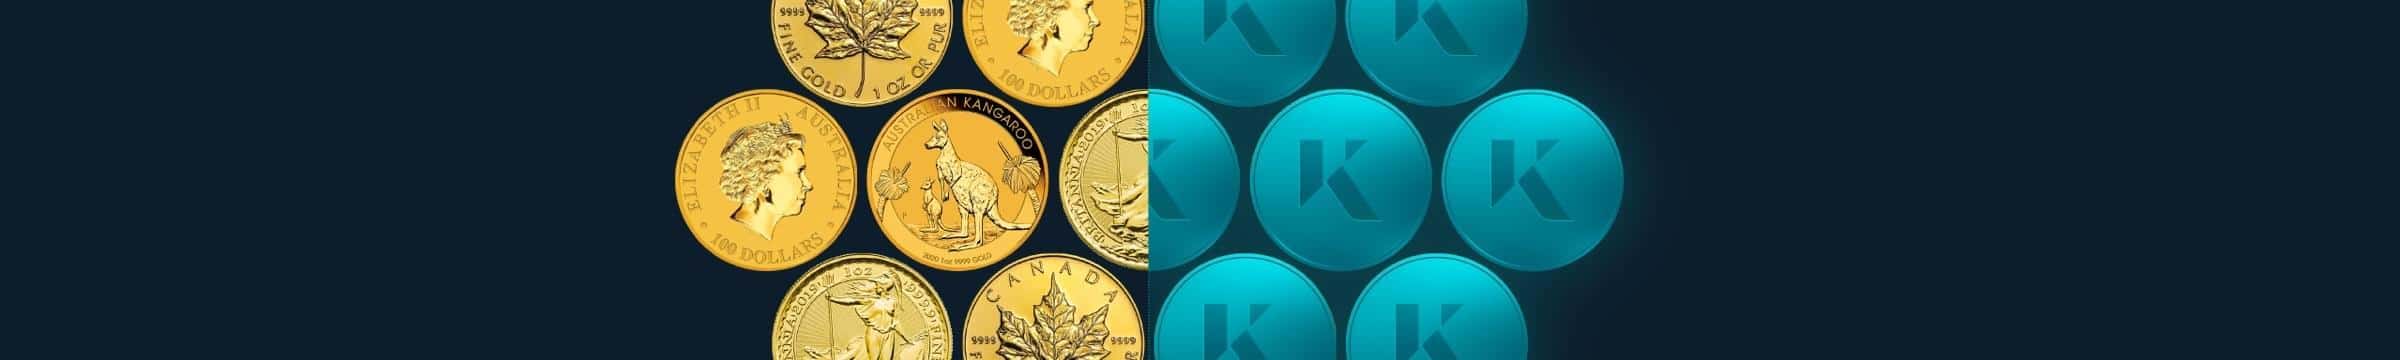 Kinesis Launches Segregated Facility for Coins and Bars